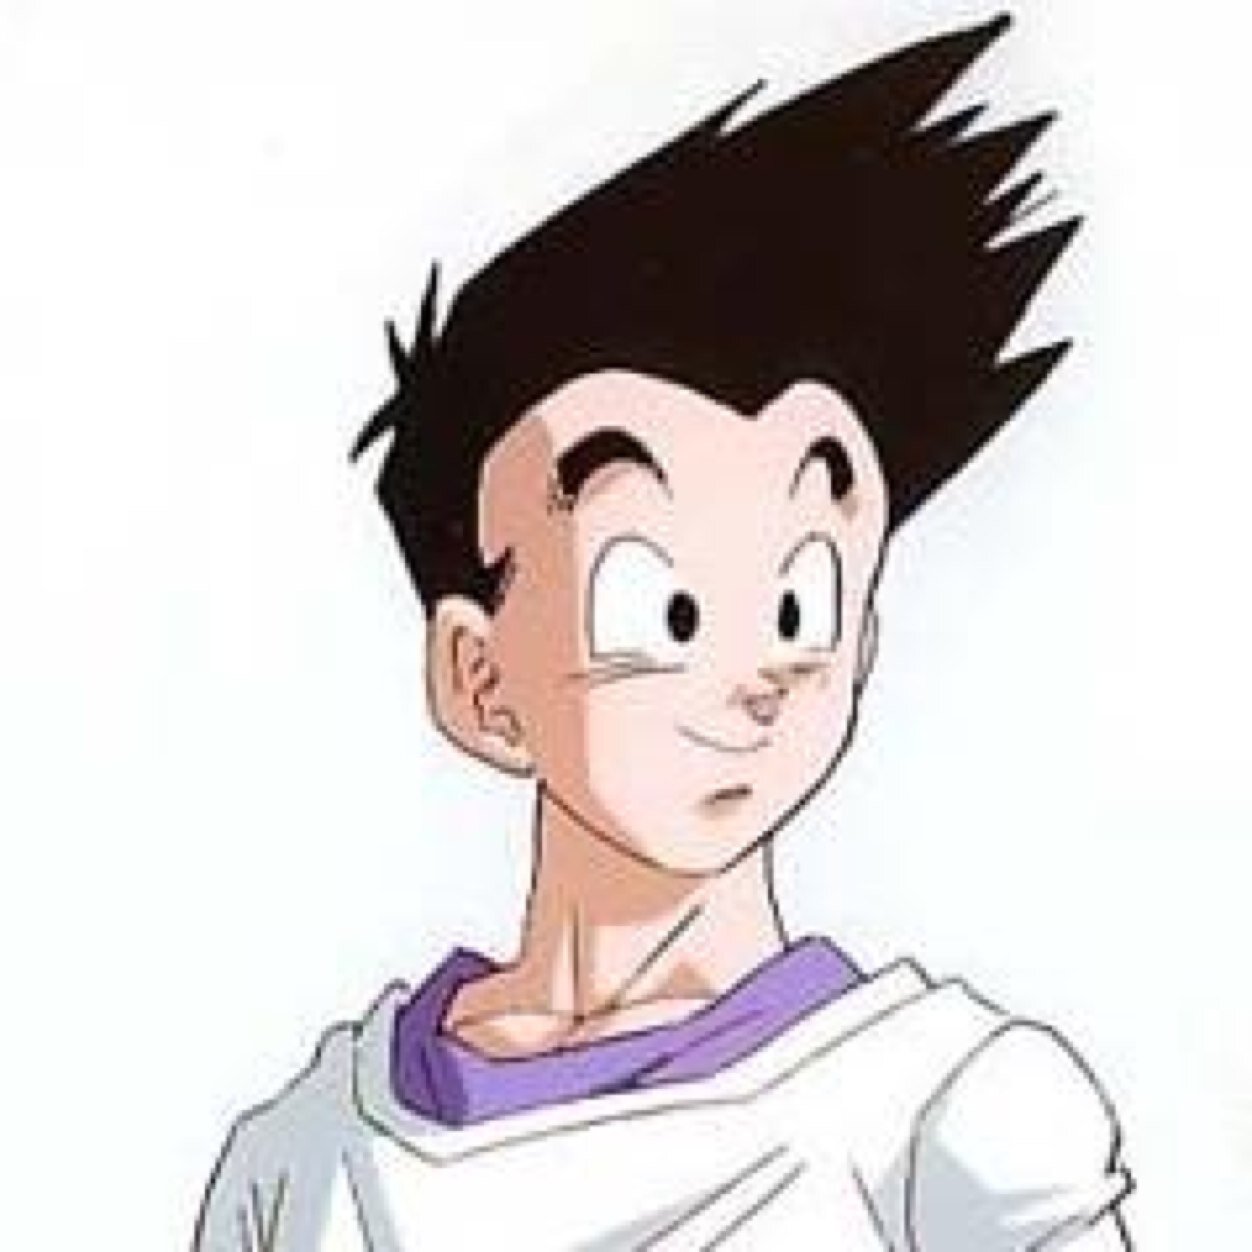 I am the son of Goku and the brother of Gohan. My best friend is Trunks. I am a saiyan and a powerful one too. @xXKirby_9999Xx and xXKirby9999Xx are me too.